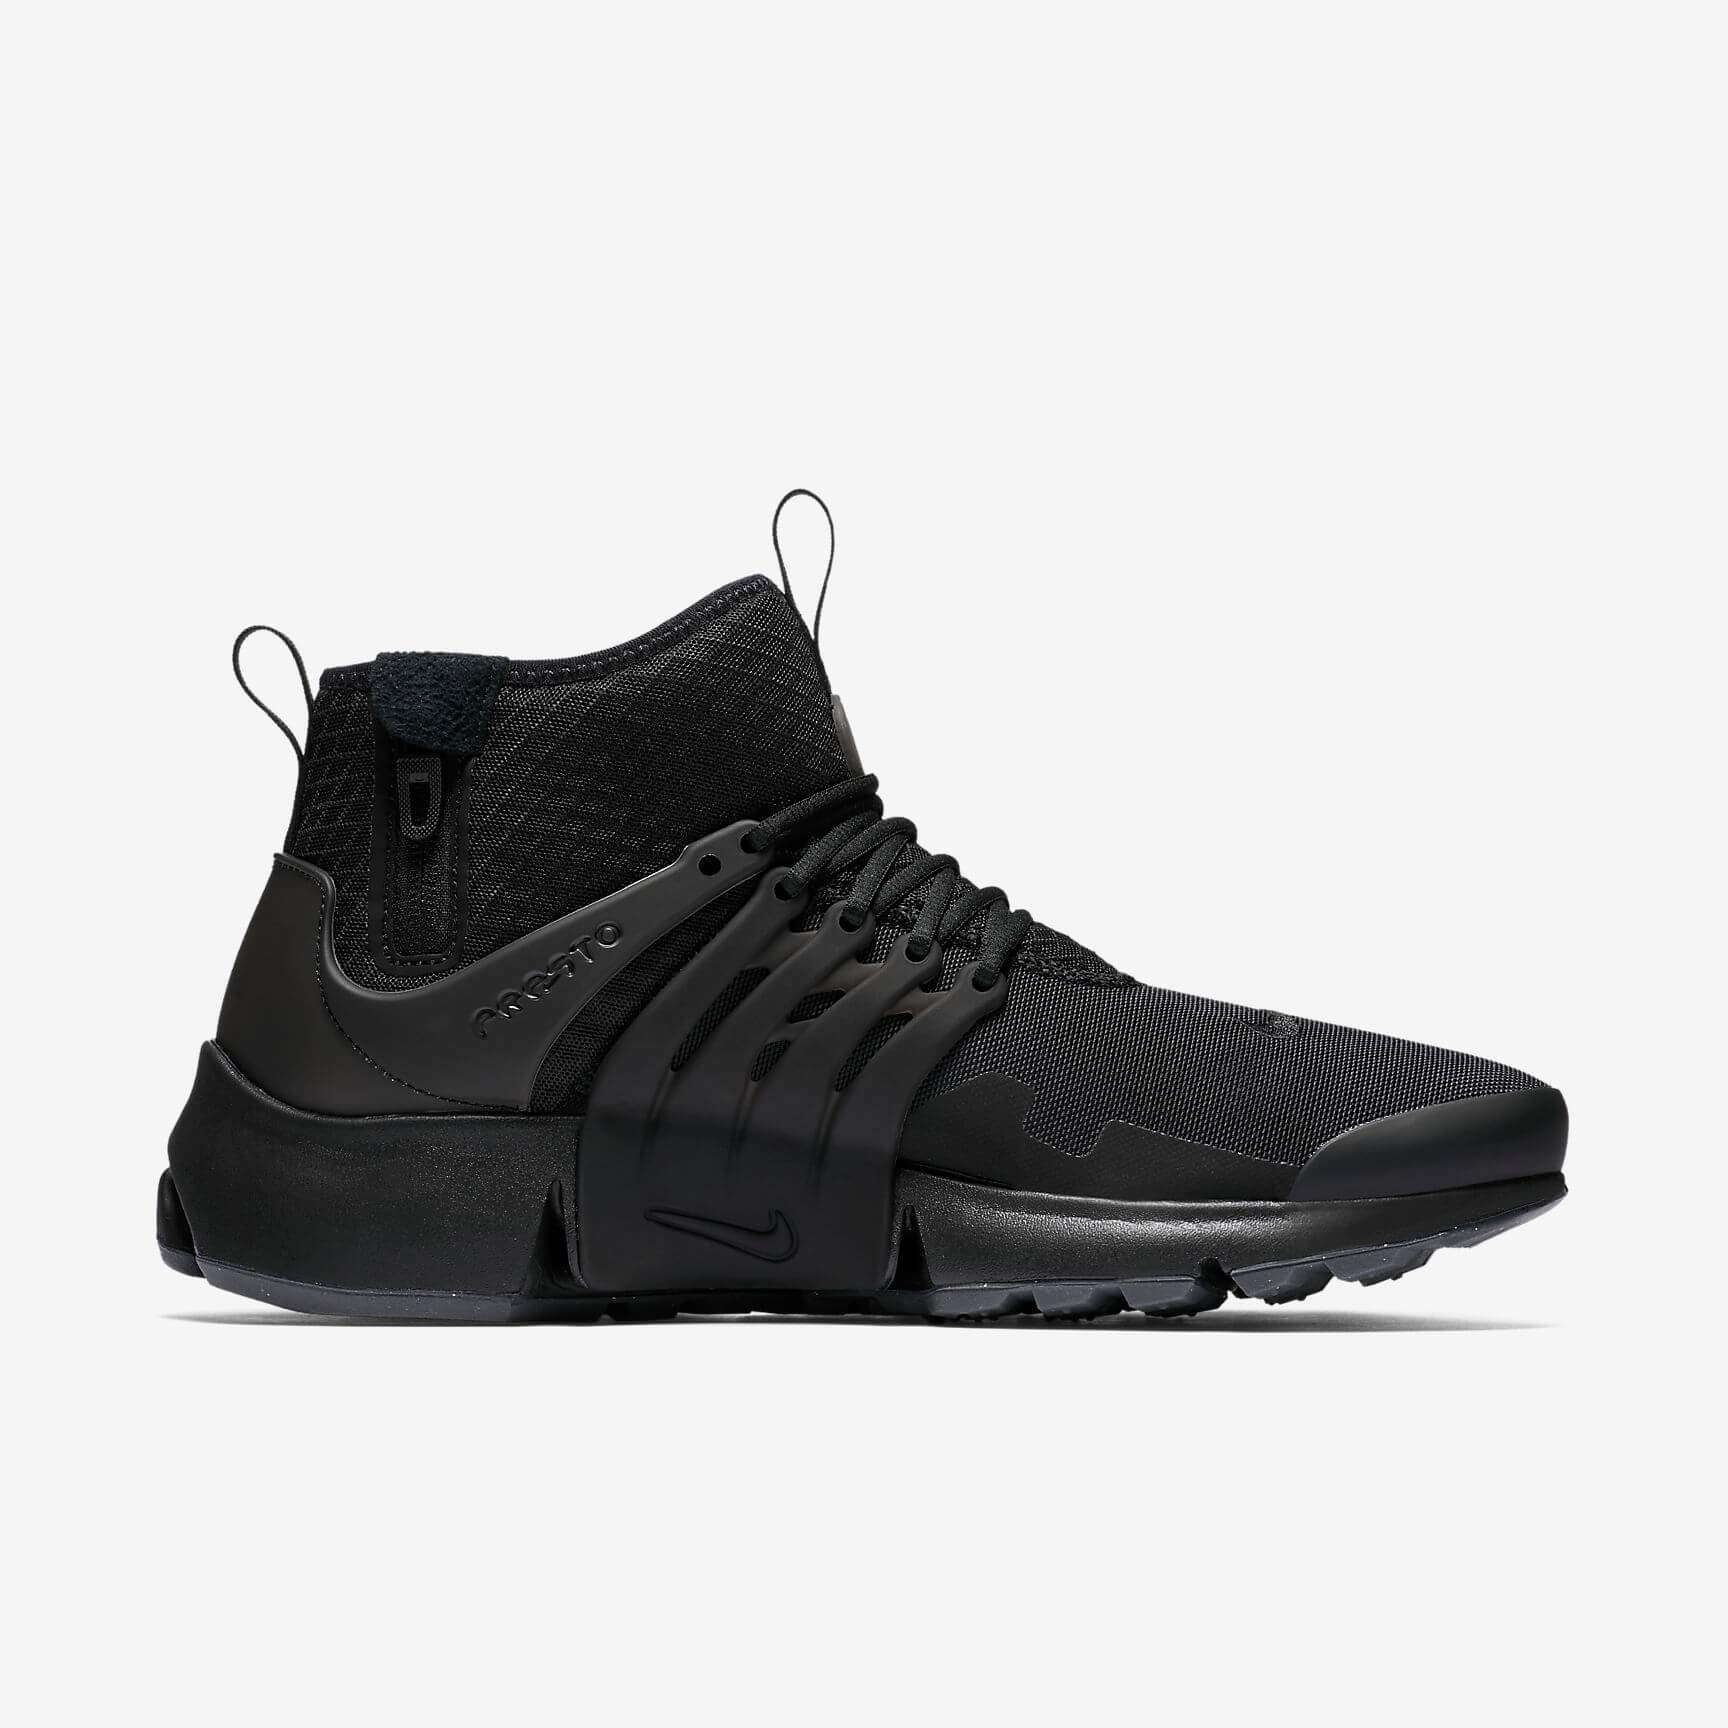 Air Presto Mid Utility Shoes for men 3